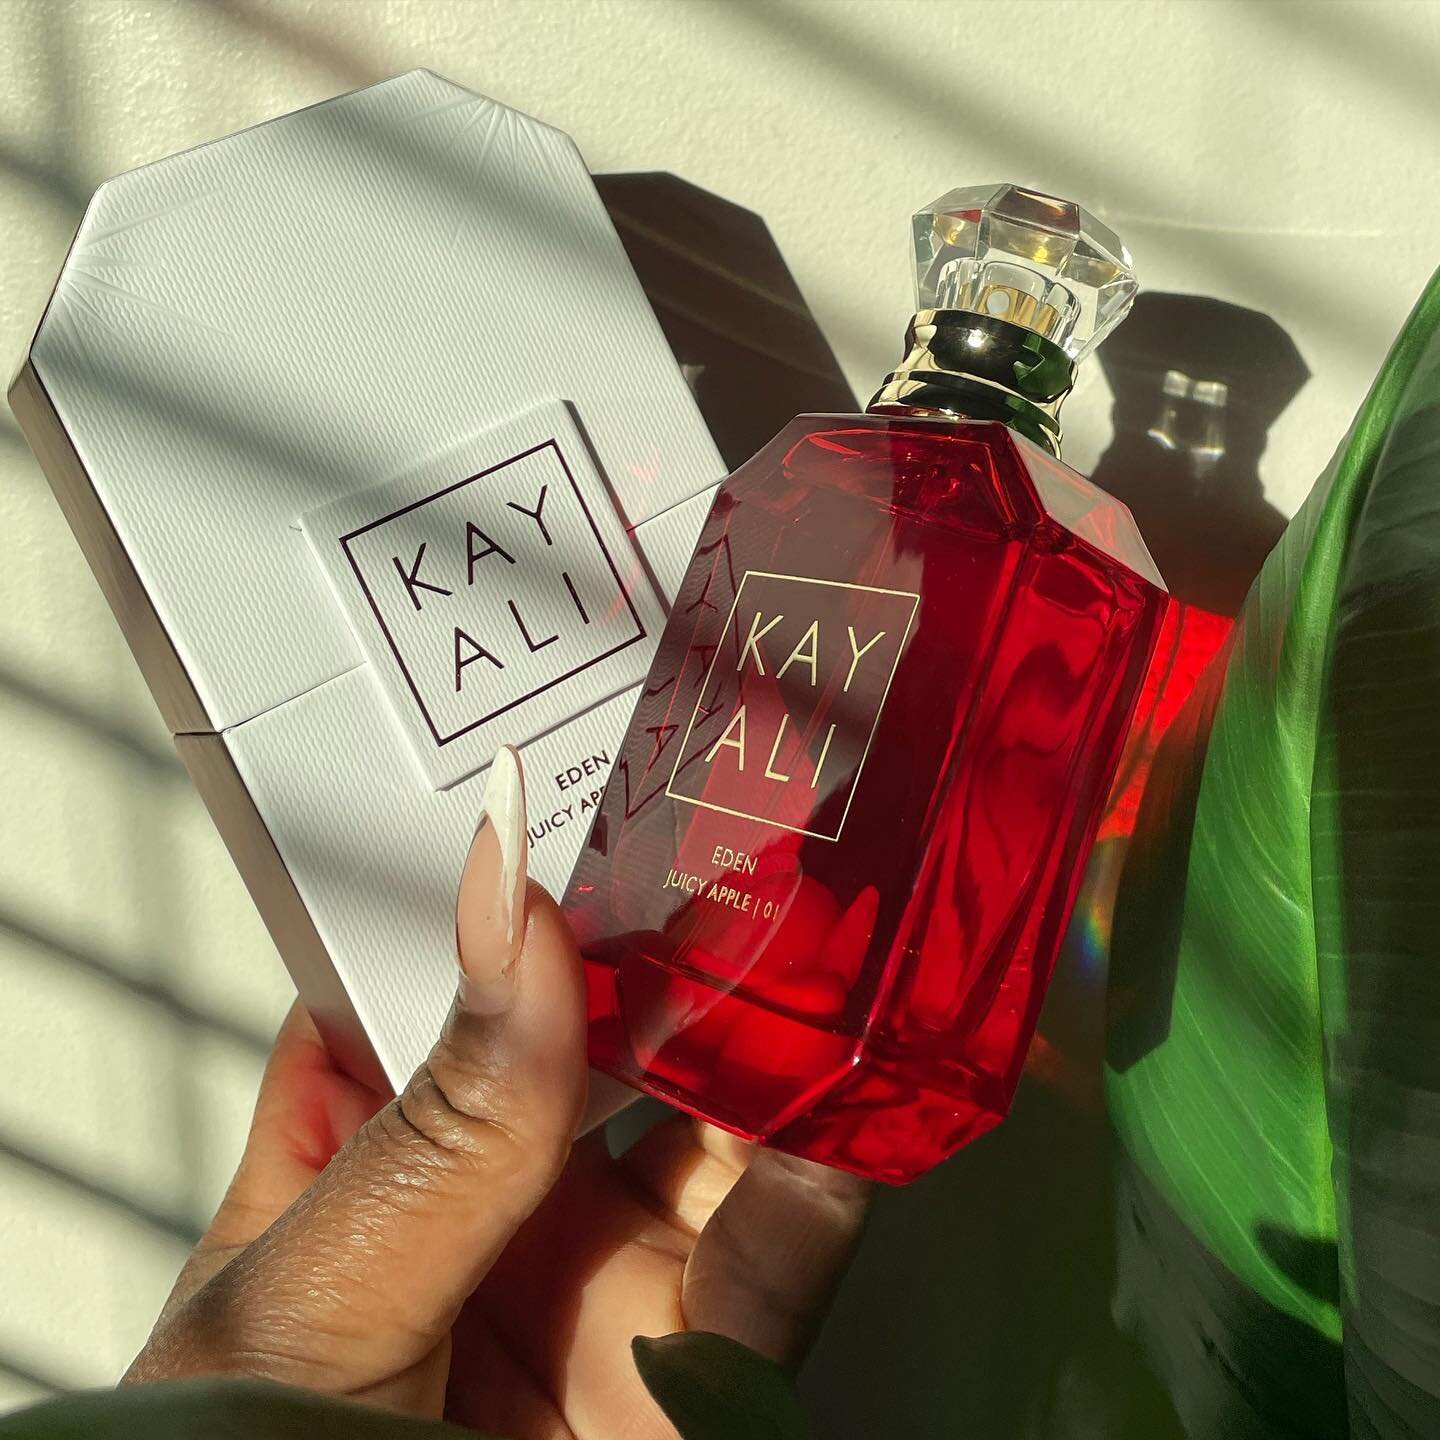 recent obsession 🍎🫶🏾 with @kayali  eden juicy apple. it&rsquo;s like a sweet &amp; sultry fruity scent. 10/10 fa me. 
.
.
.
#kayali #kayaliperfumes #juicyapple #kayalijuicyapple #perfumecollection #scentoftheday